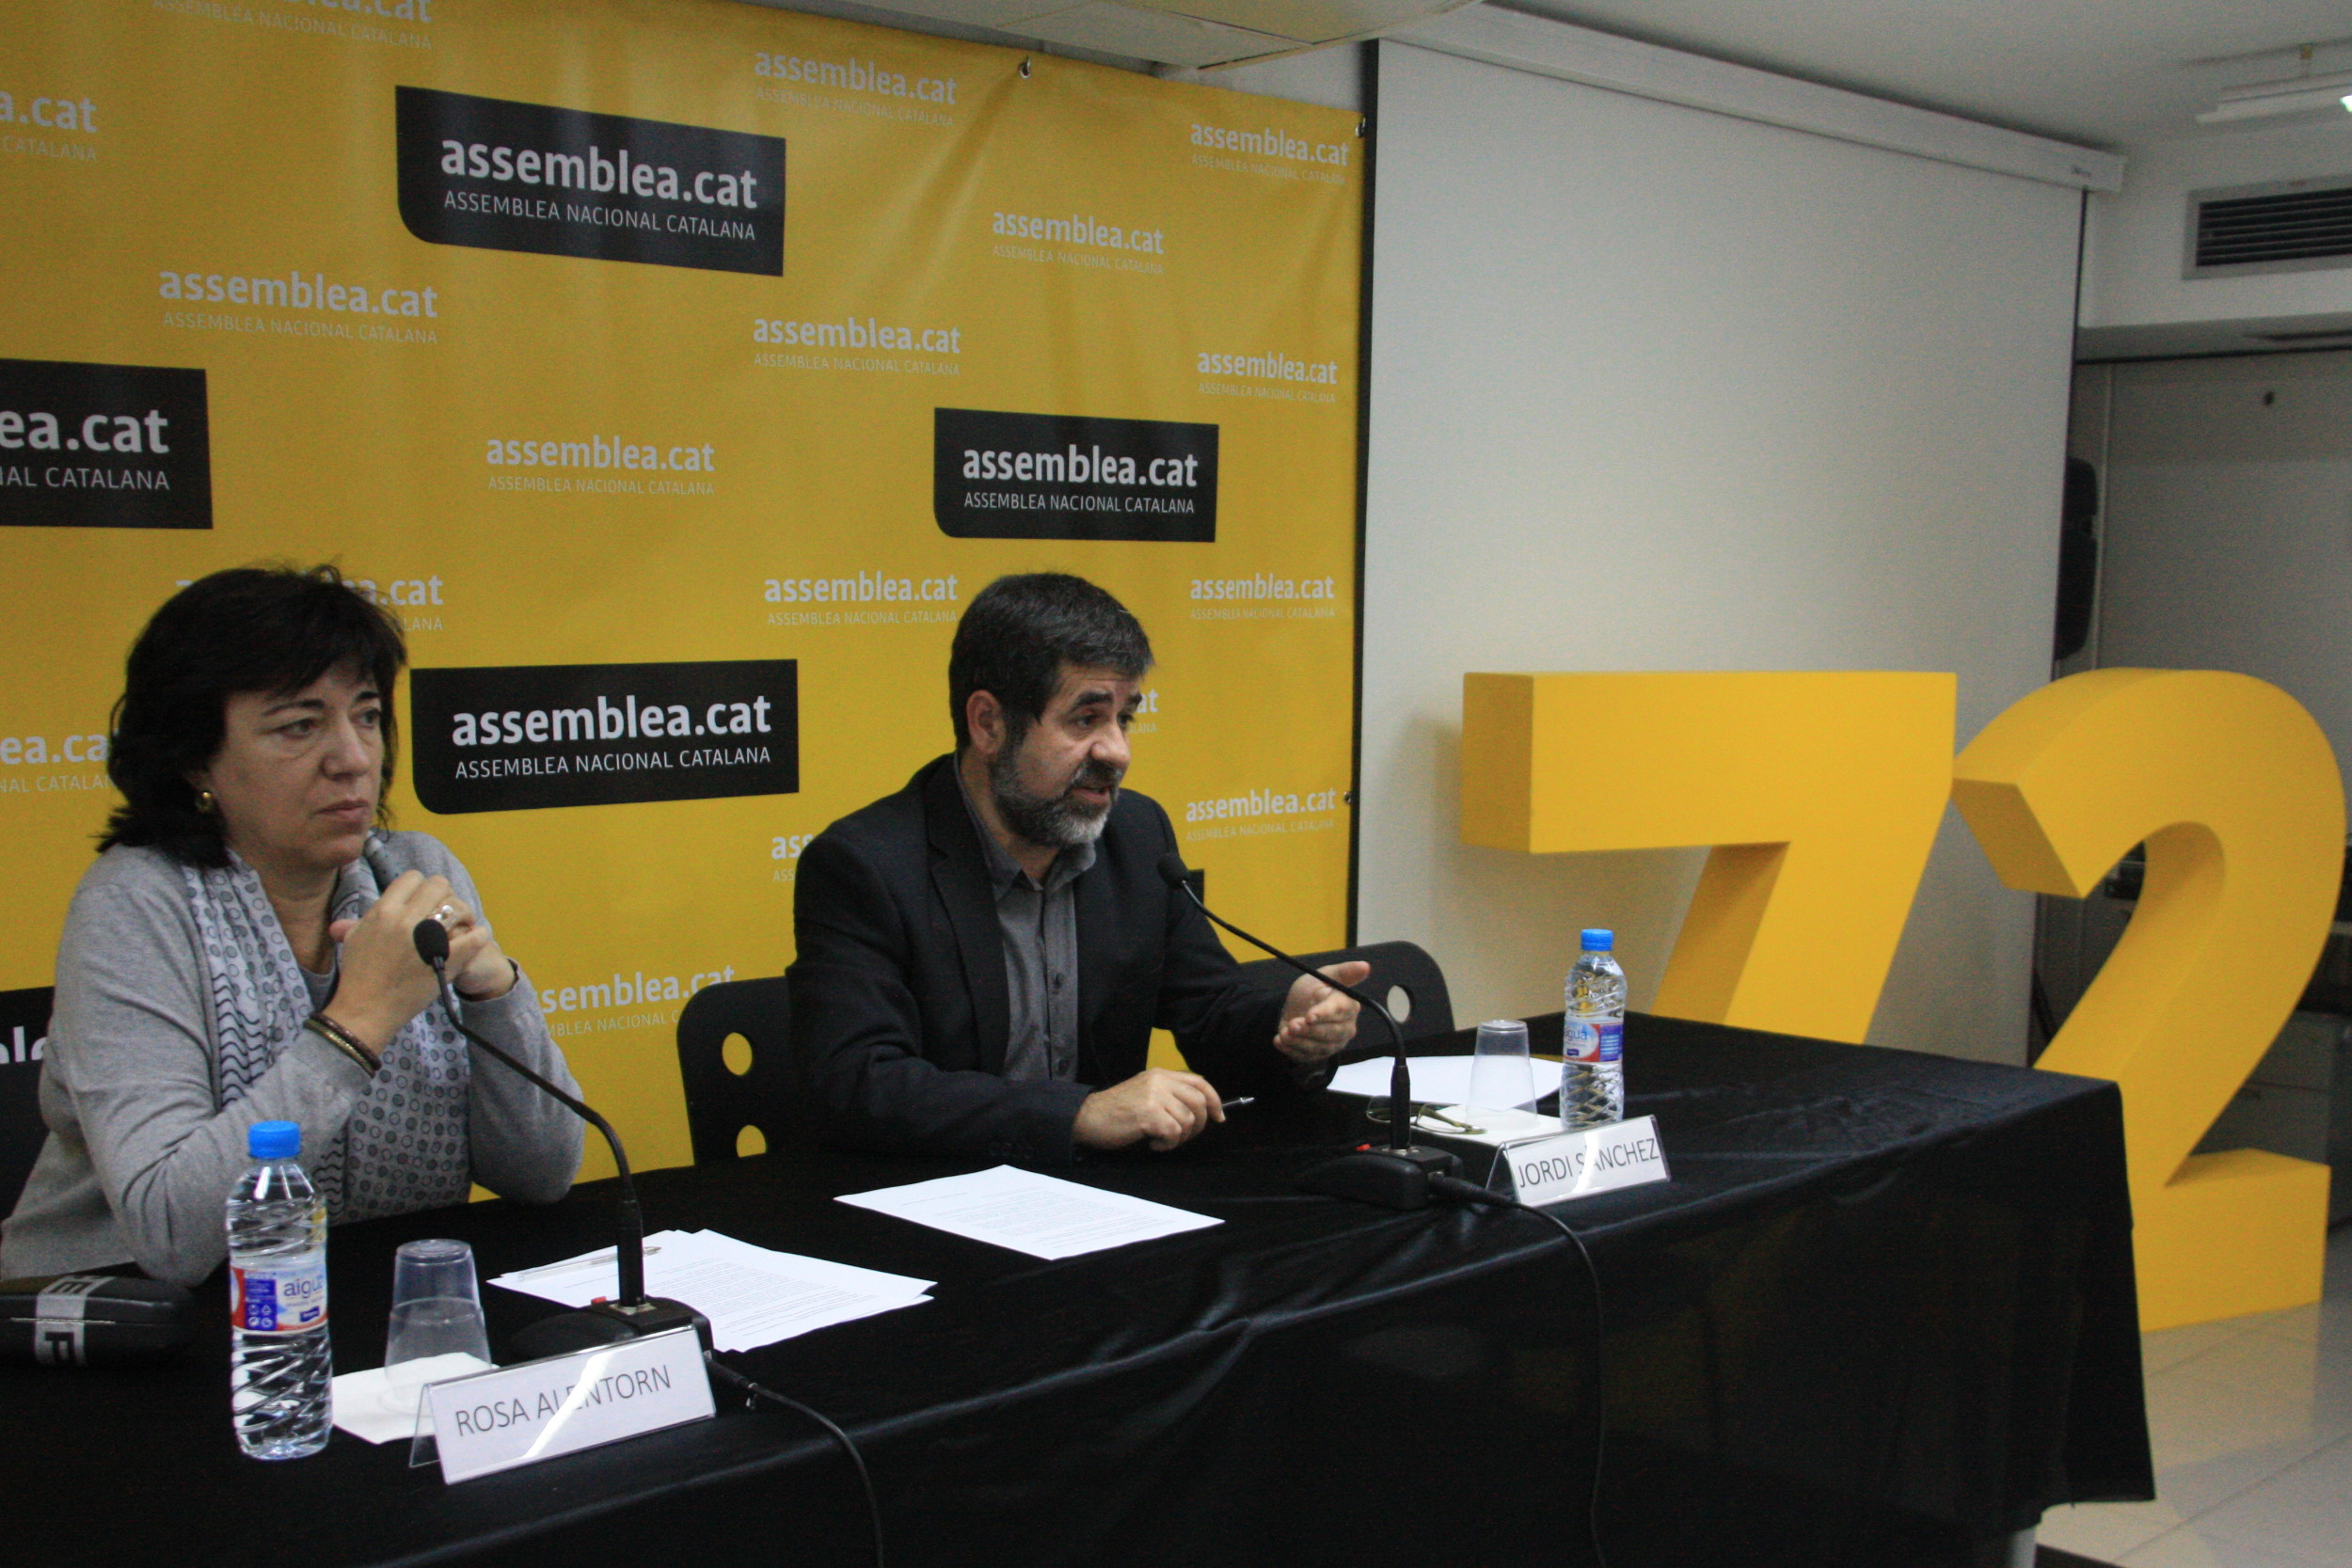 Catalan National Assembly (ANC)'s president, Jordi Sànchez and vice-president, Rosa Alentorn, presenting de document 'Let's build the Catalan Republic' before the media (by ACN) 